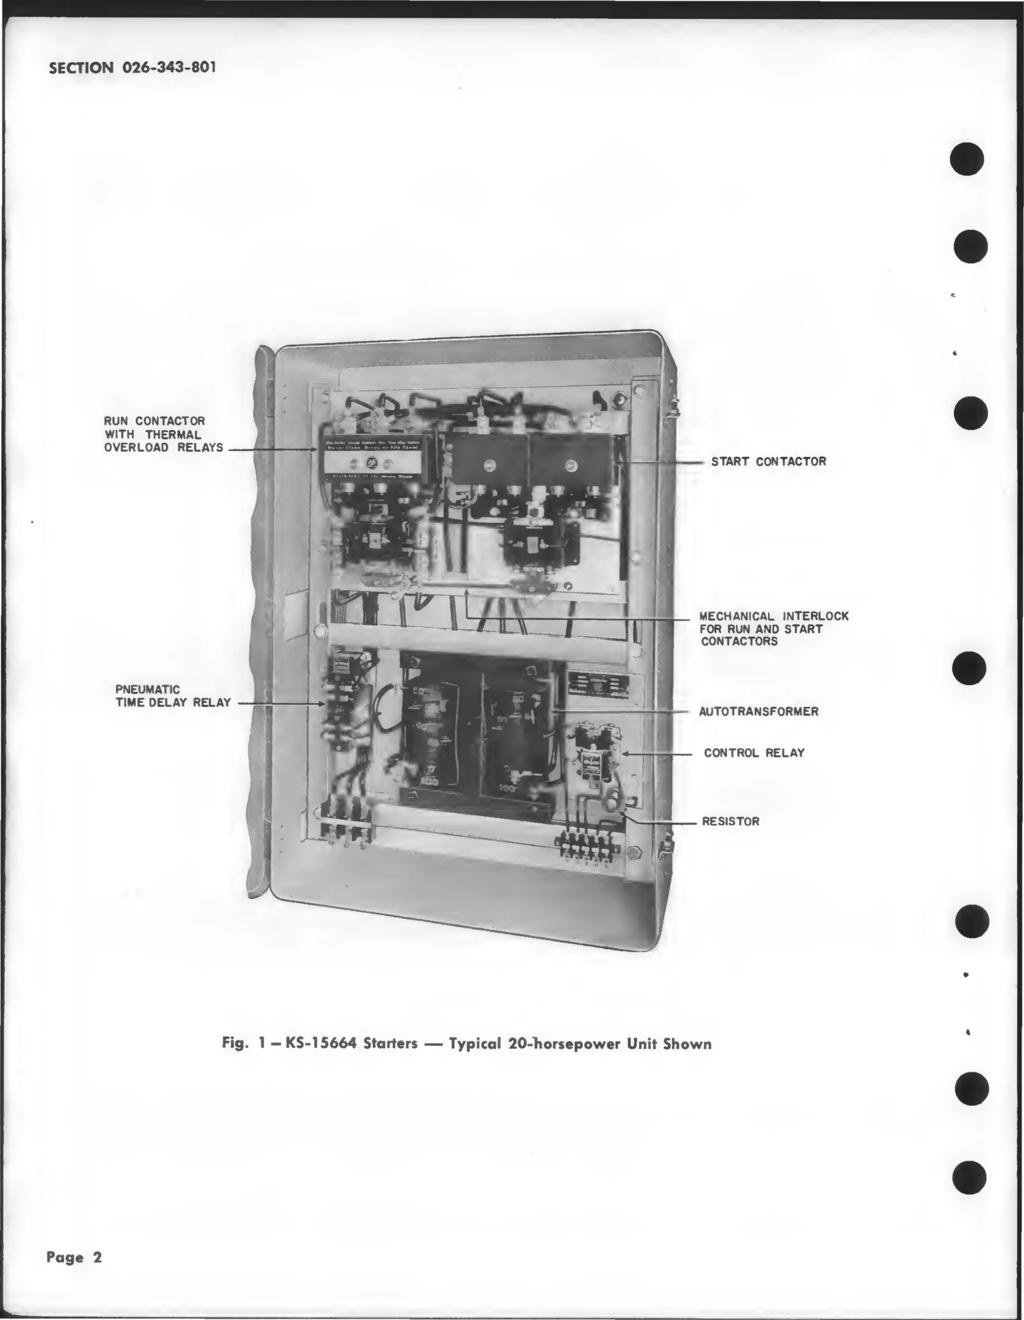 SECTION 026-343-801 RUN CONTACTOR WITH THERMAL OVERLOAD RELAYS PNEUMATIC TIME OElAY RELAY Fig, 1 - KS 15664 Starters - Typical